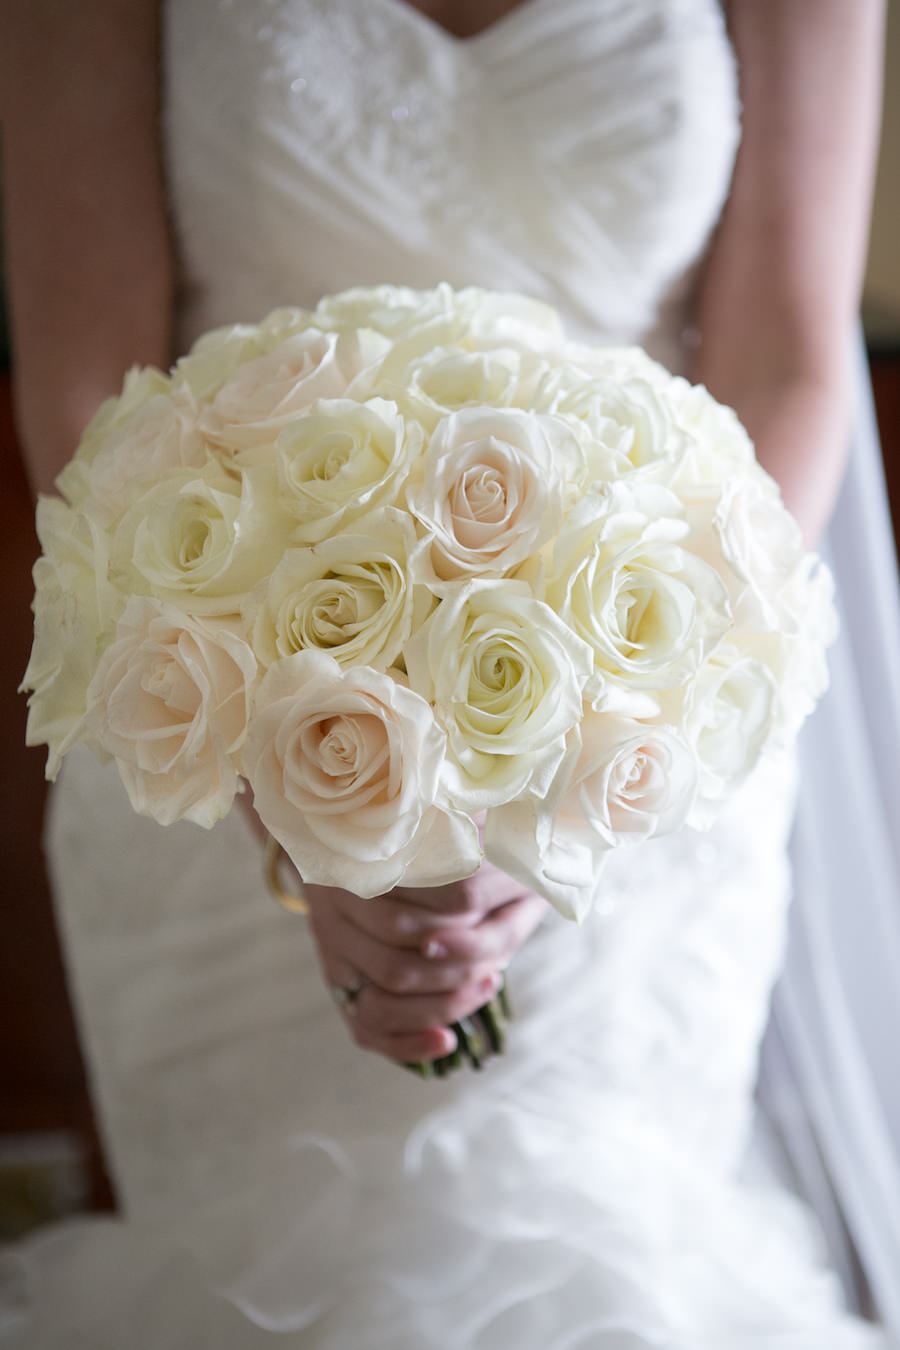 Ivory and Blush Bridal Wedding Bouquet of Roses | Downtown Tampa Wedding Florist Northside Florist | Wedding Photography by Carrie Wildes Photography